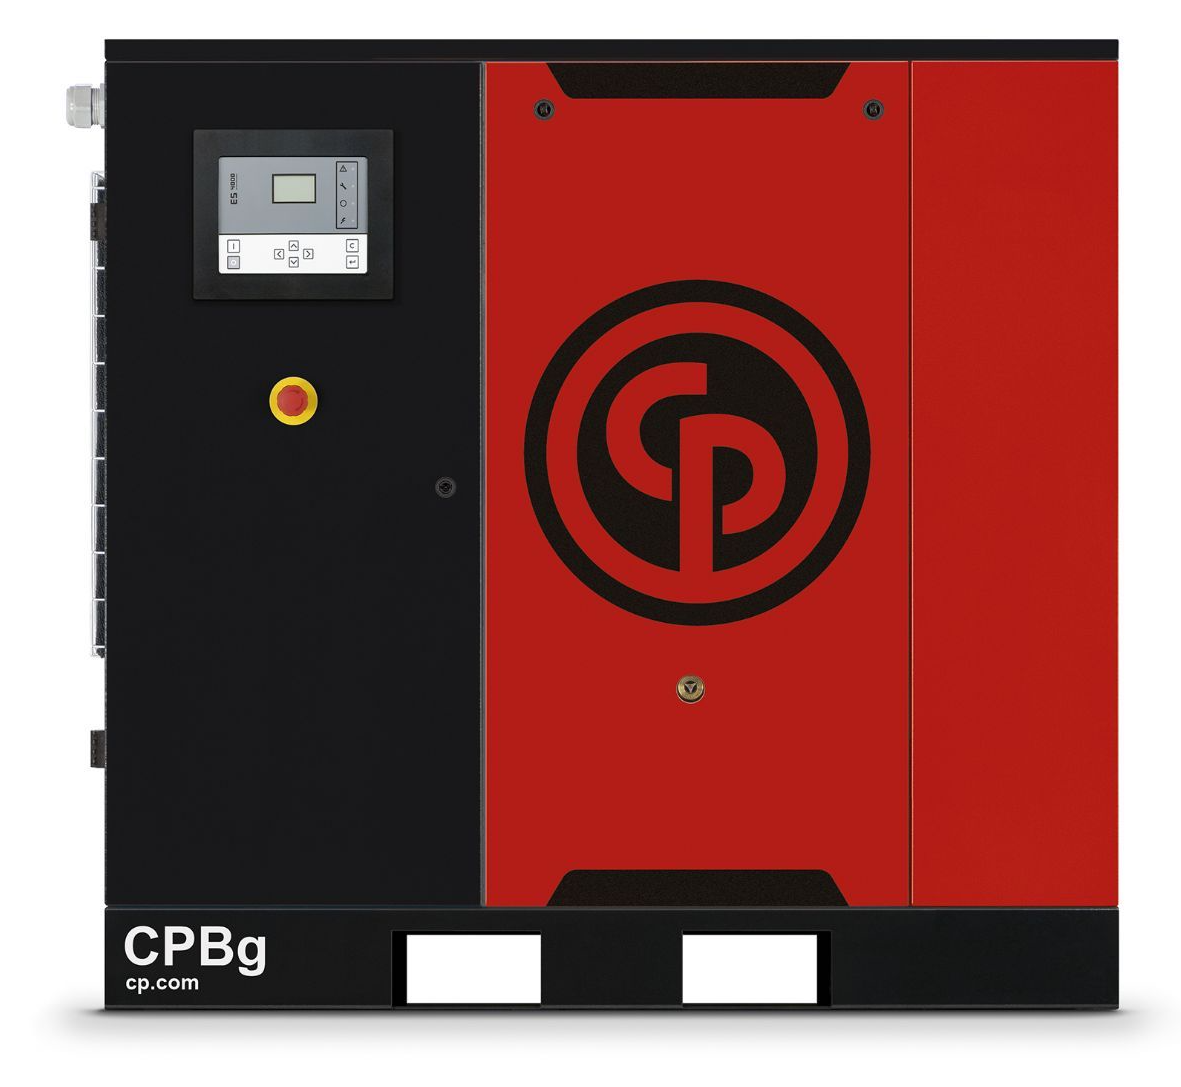 Chicago Pneumatic CPBg 35 HP Base Mount Rotary Screw Air Compressor | 128 CFM@175 PSI, 208-230/460 volt, 3 Phase | 4152017614